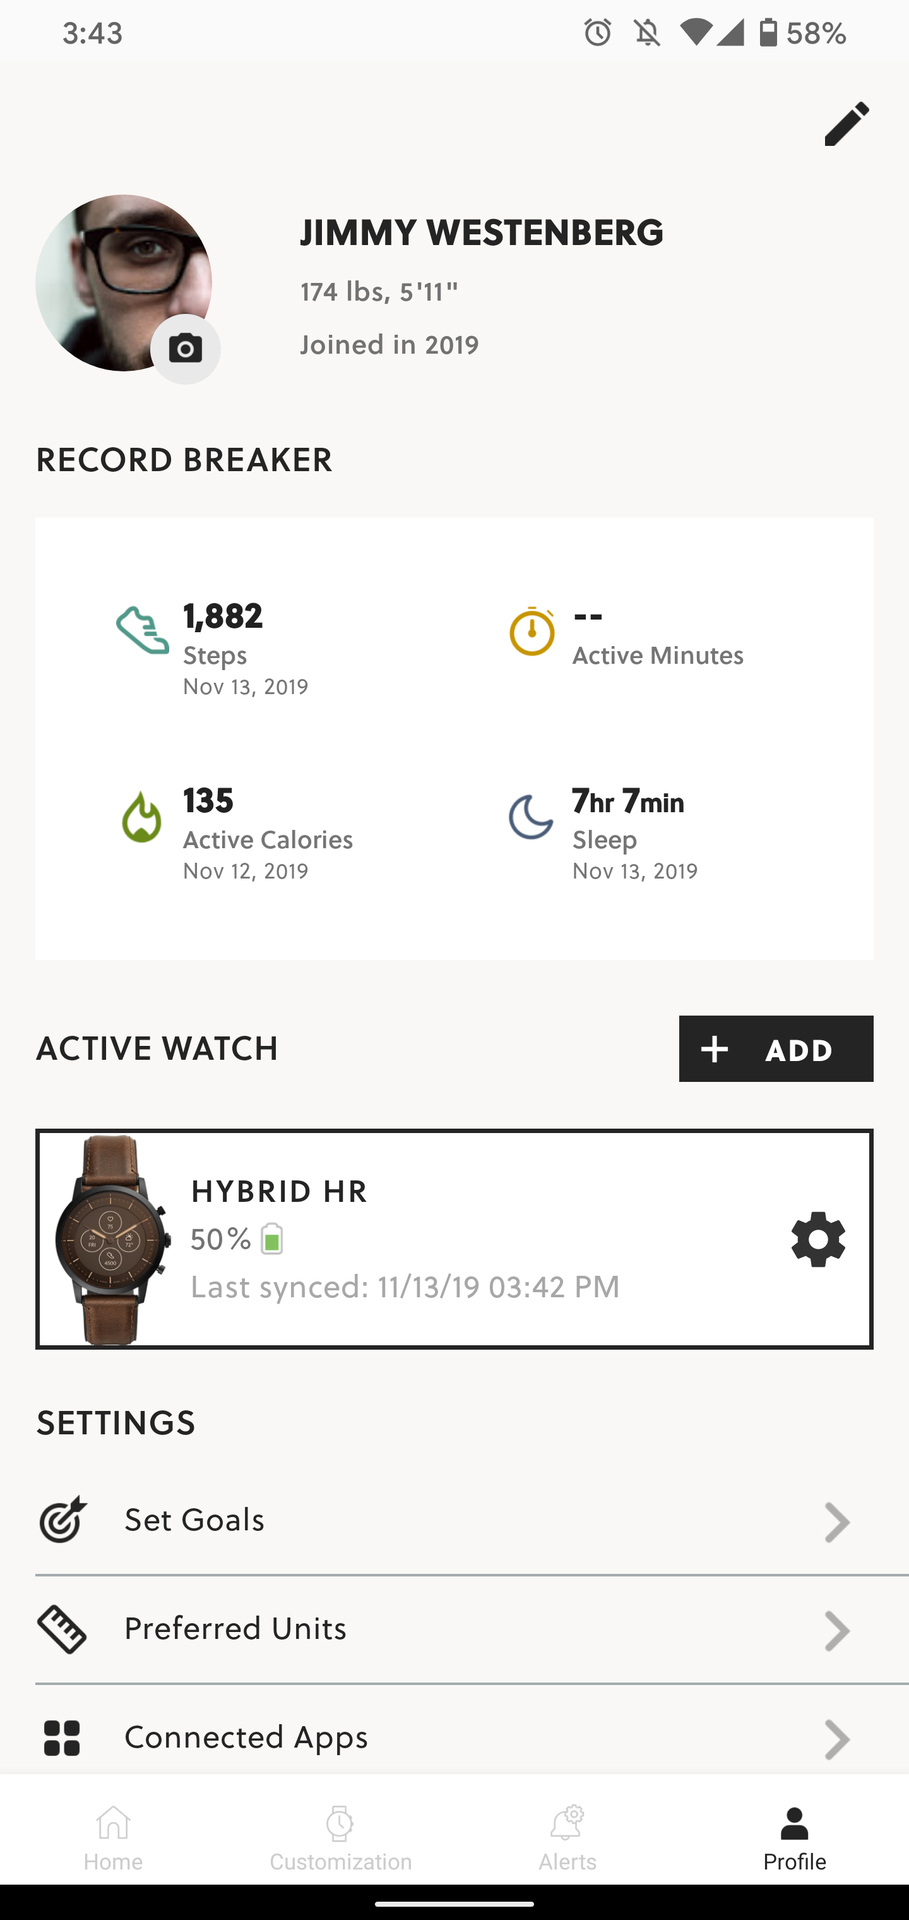 fossil hybrid smartwatches app how to use fossil watch app profile page